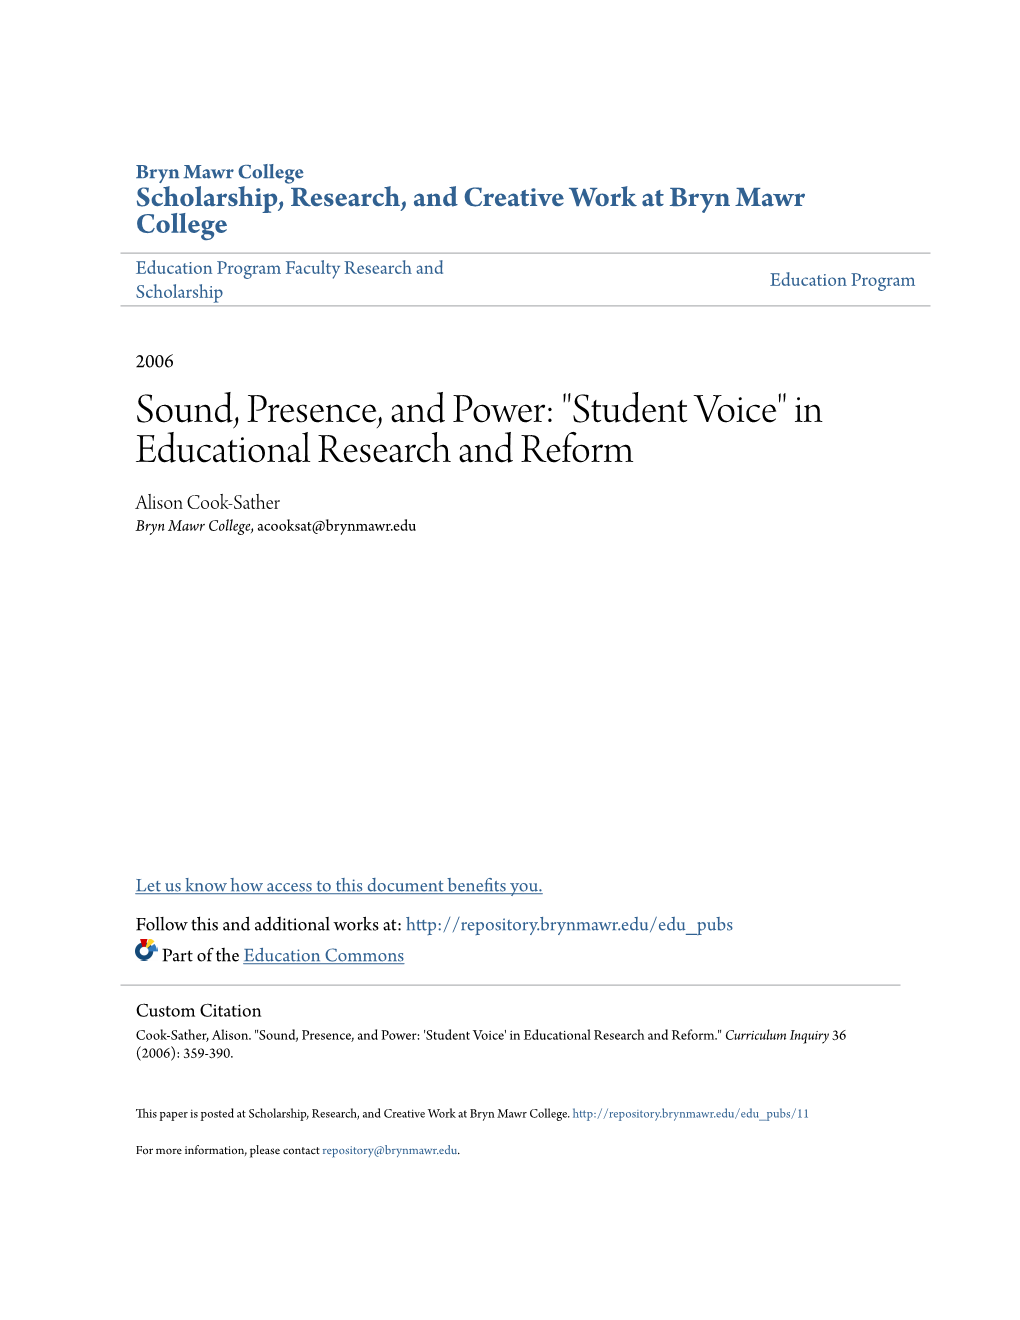 Student Voice" in Educational Research and Reform Alison Cook-Sather Bryn Mawr College, Acooksat@Brynmawr.Edu